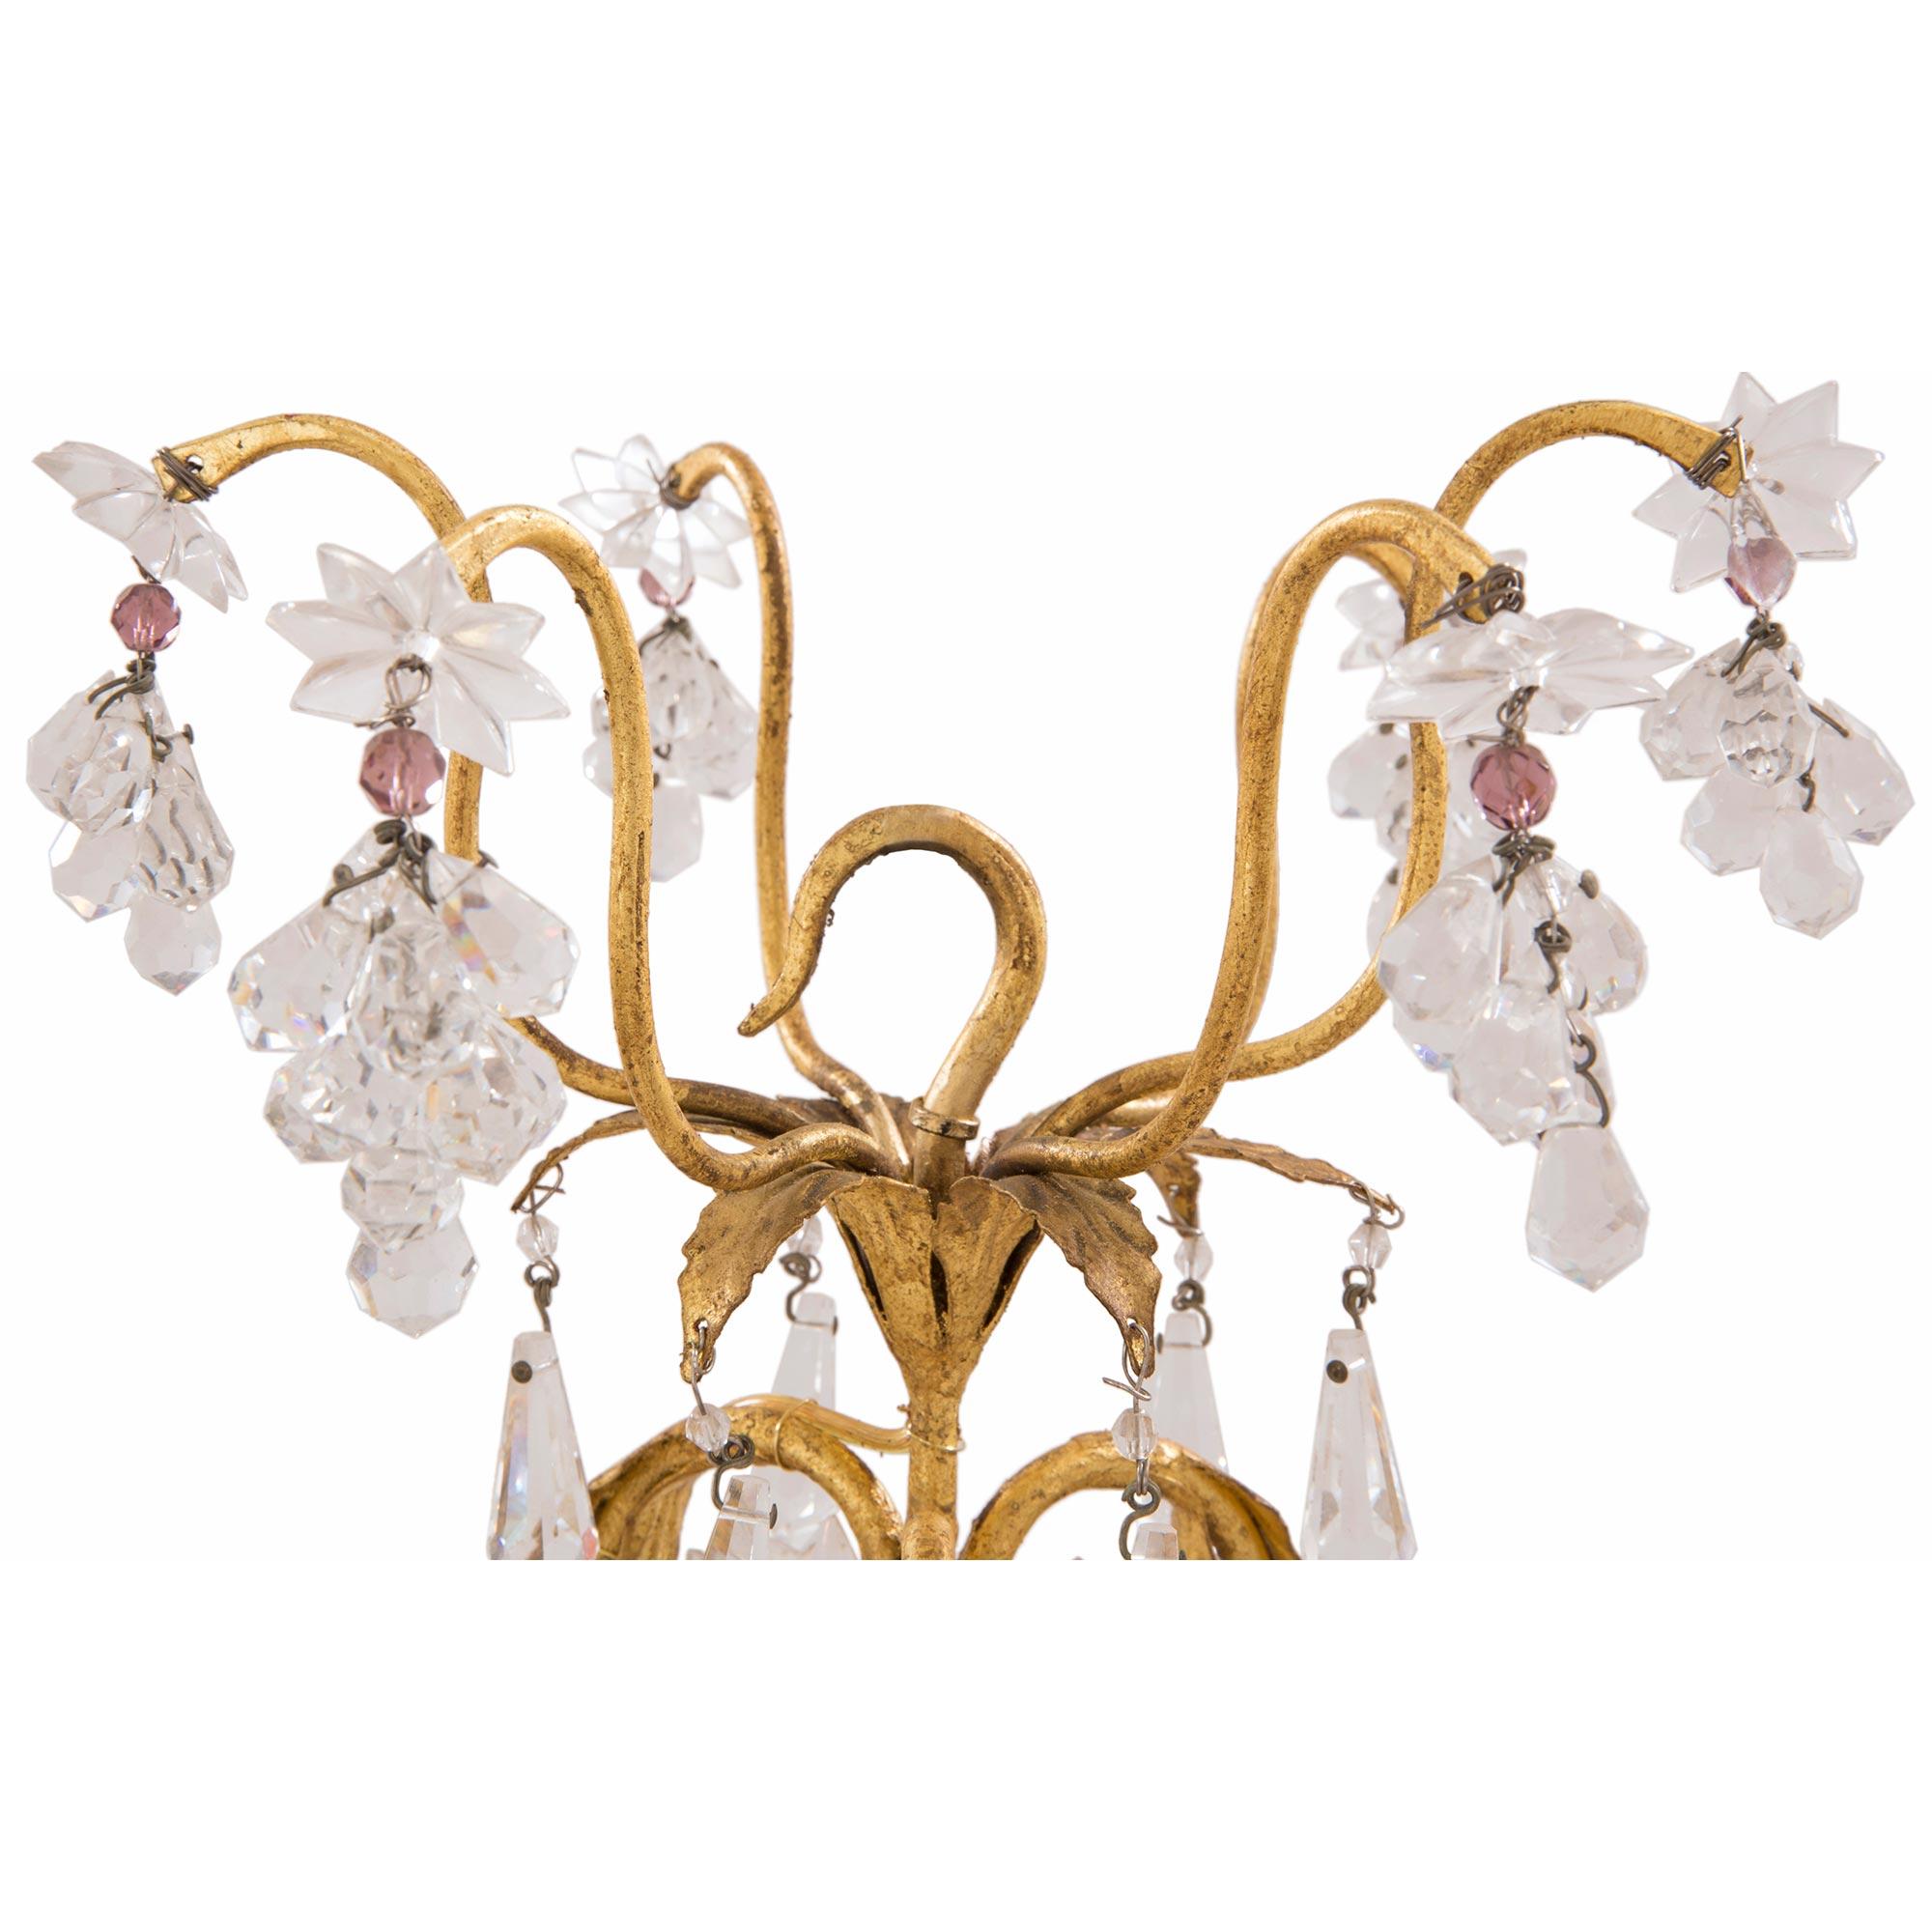 Pair of French 19th Century Louis XV St. Chandeliers Attributed to Maison Baguès In Good Condition For Sale In West Palm Beach, FL